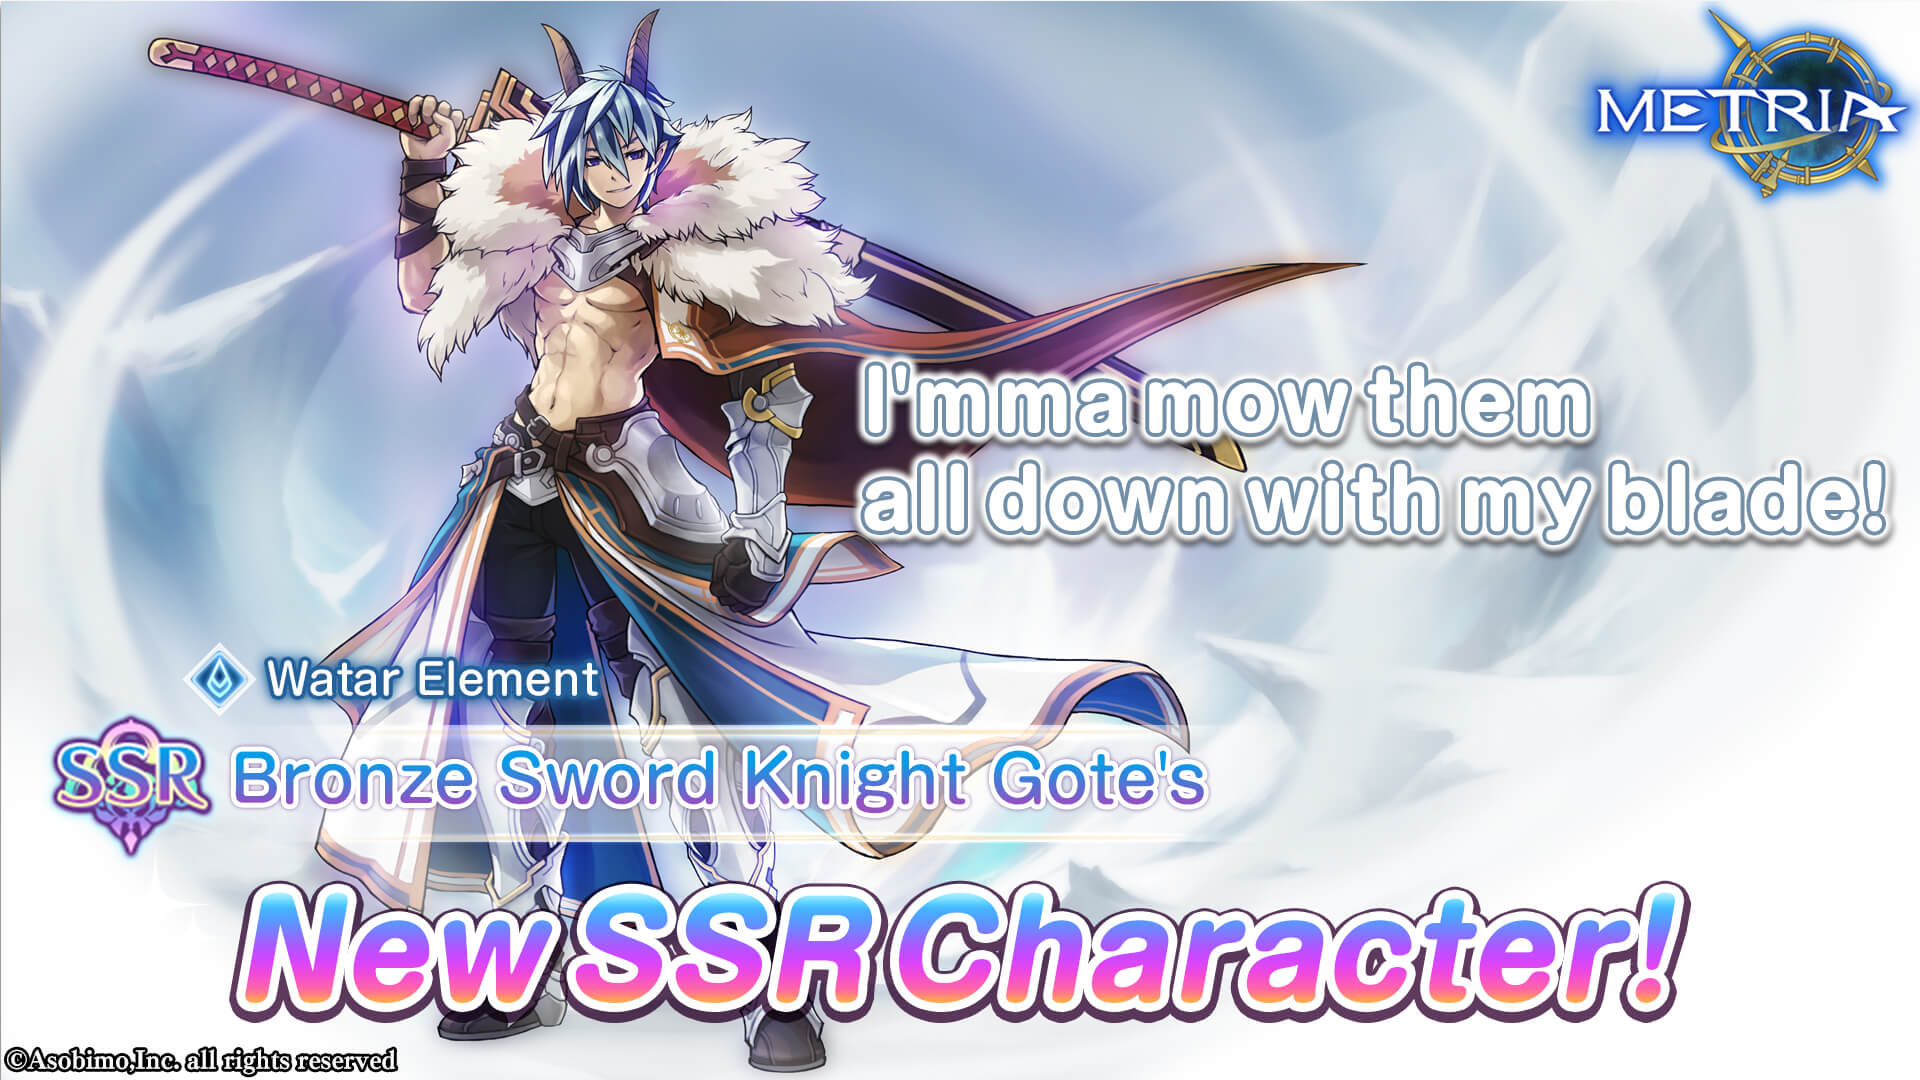 Water Element! New SSR Character: "Bronze Sword Knight Gote's" Available for Purchase!